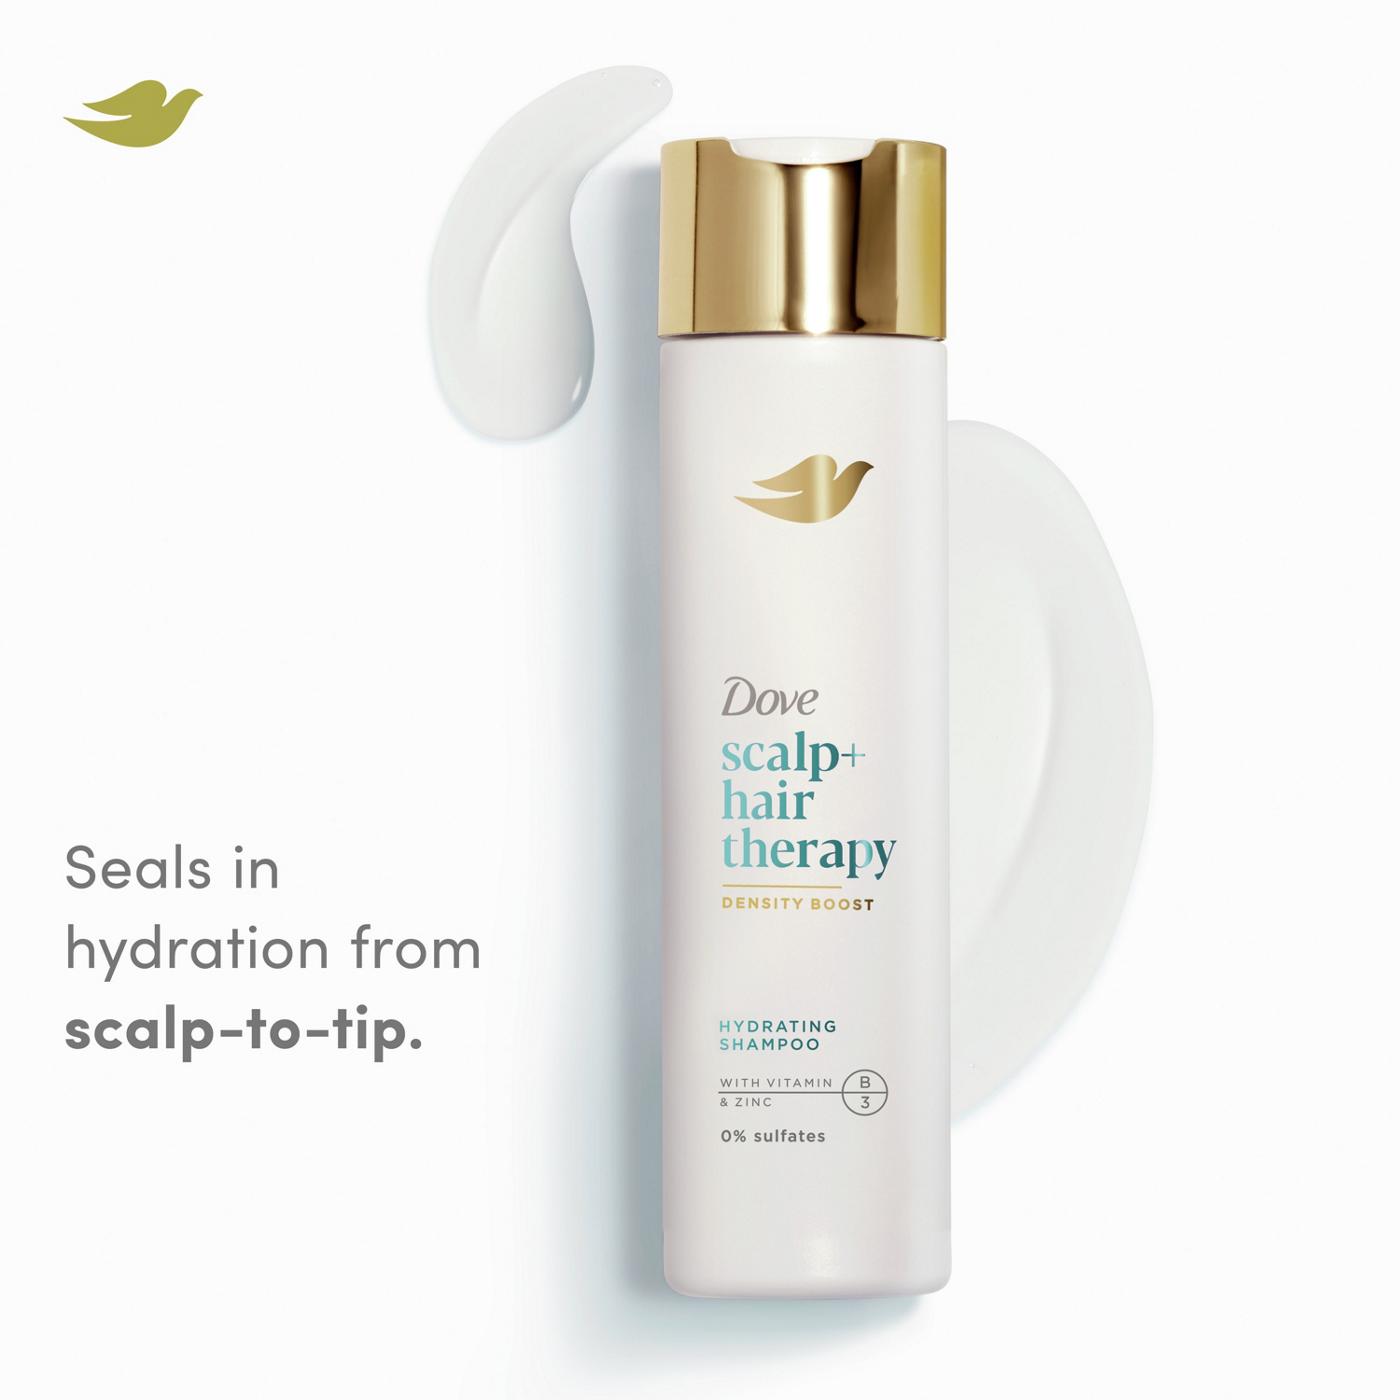 Dove Scalp+ Hair Therapy Hydrating Shampoo; image 4 of 4